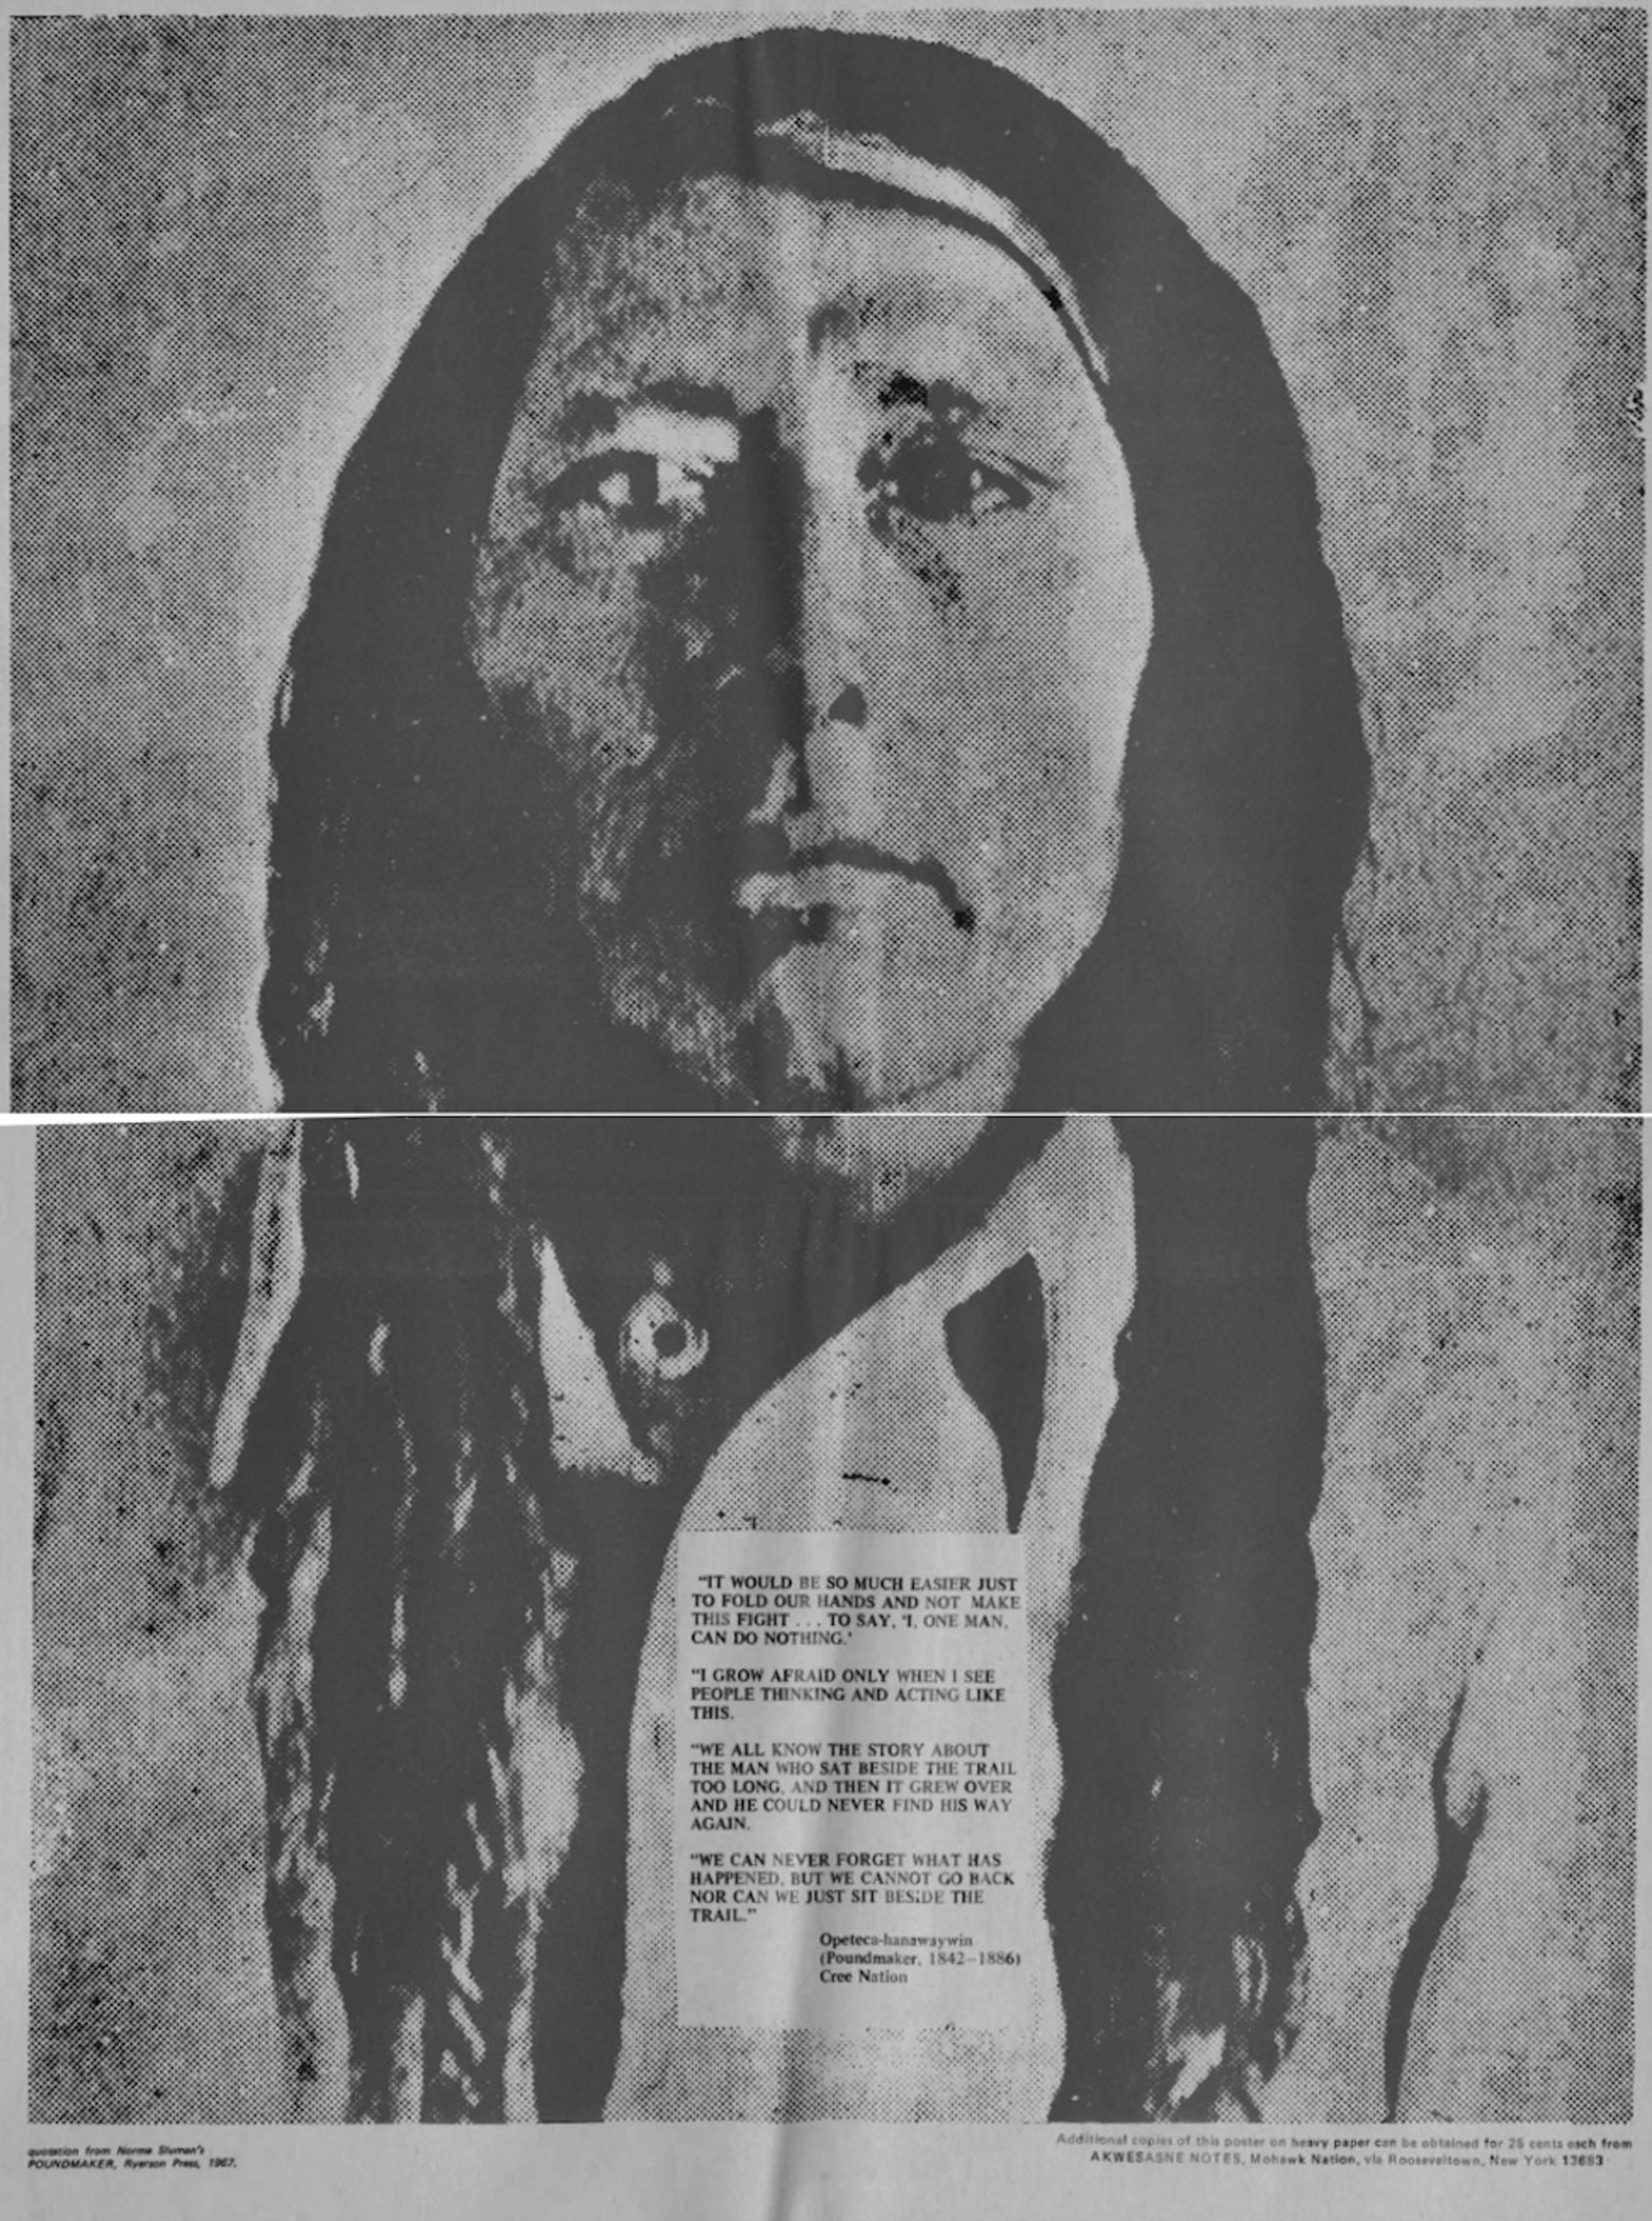 Black-and-white duotone image of a Native American man seen from the shoulders up.